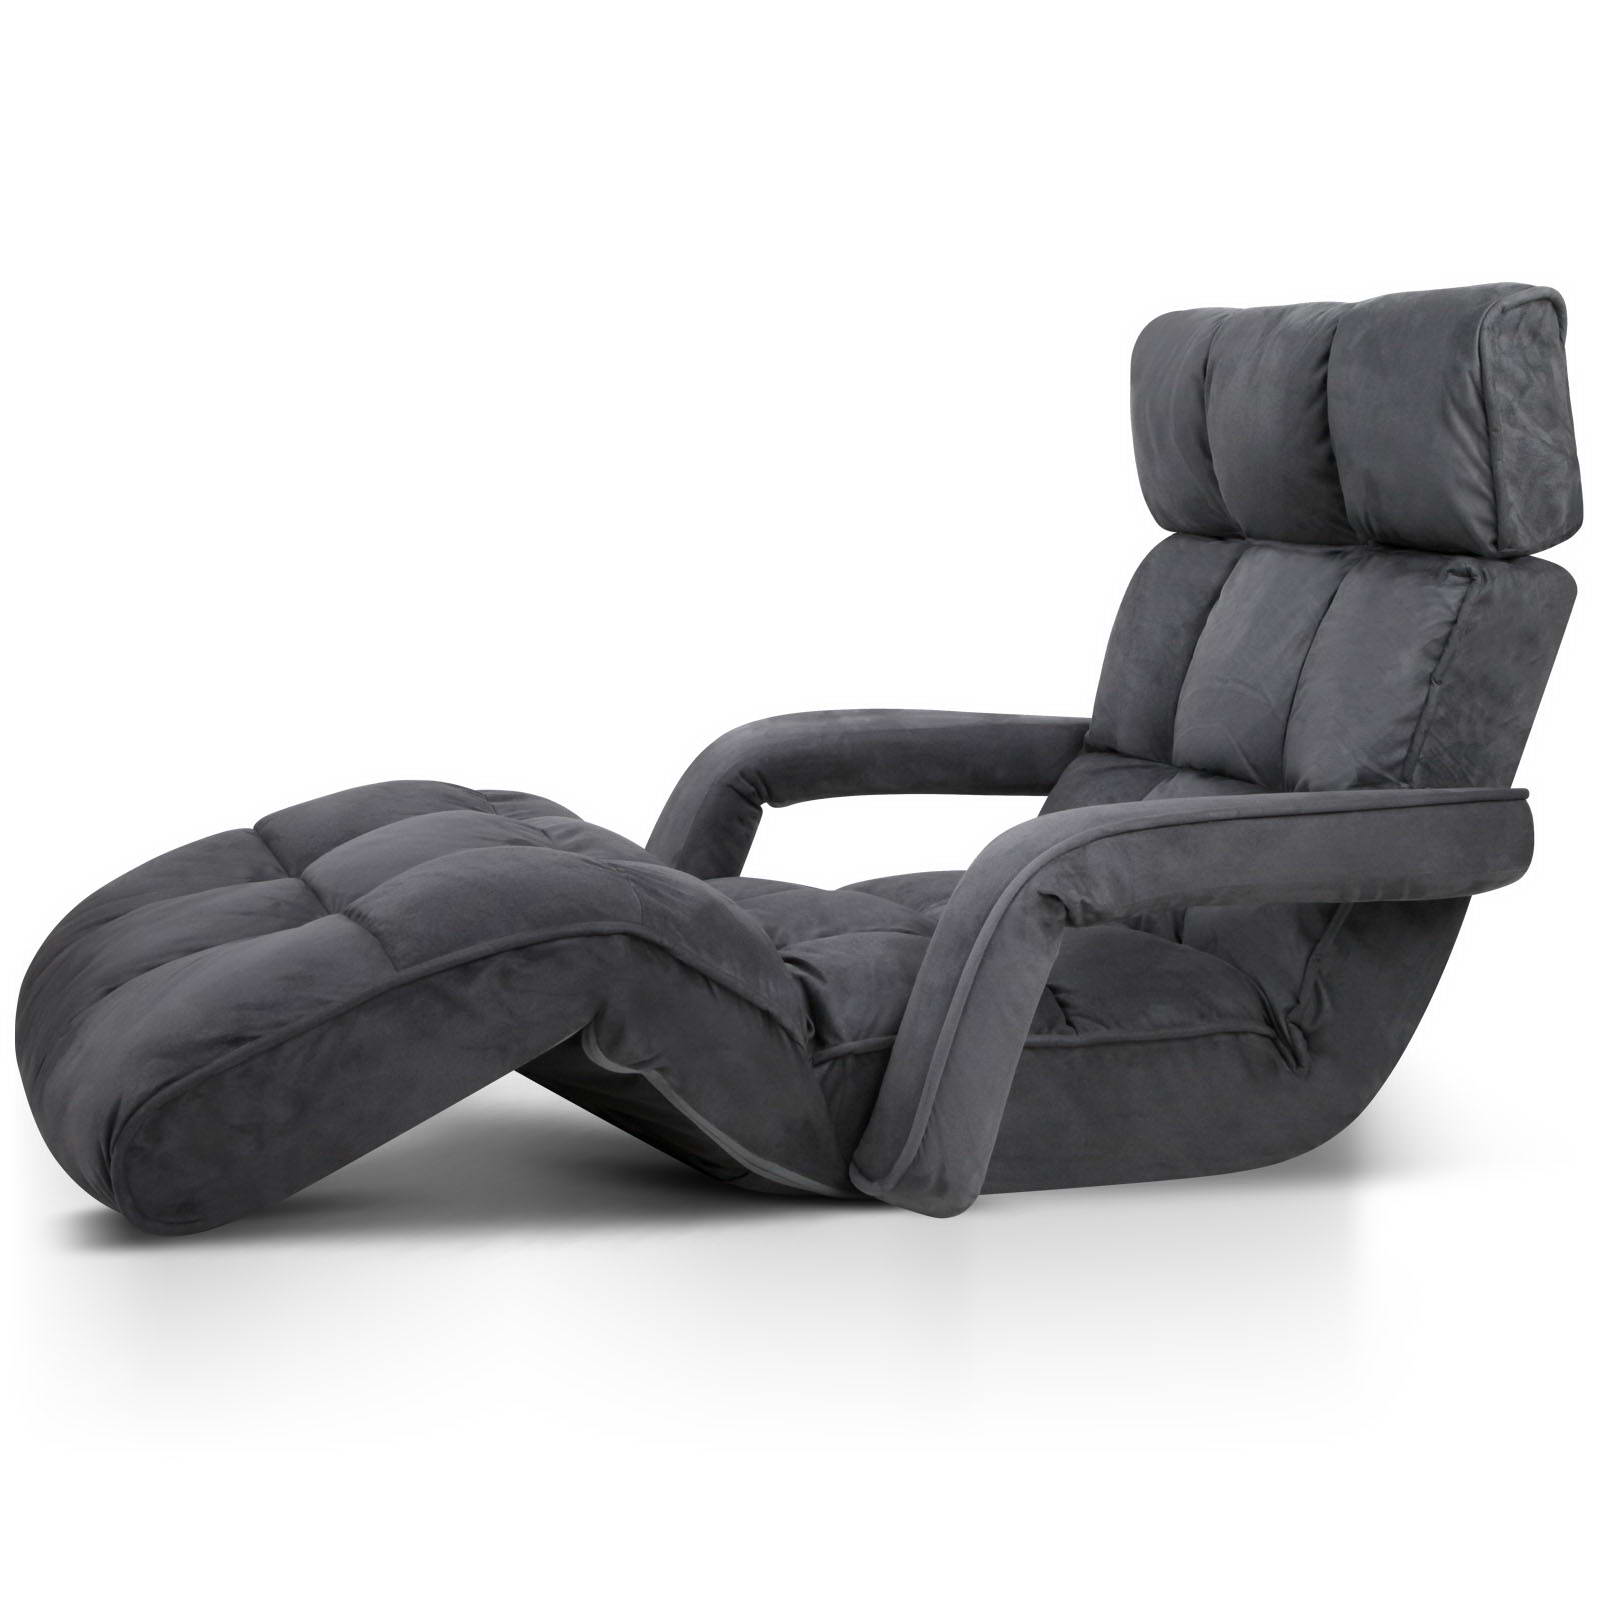 Lounge Sofa Bed Floor Armchair Folding Recliner Chaise